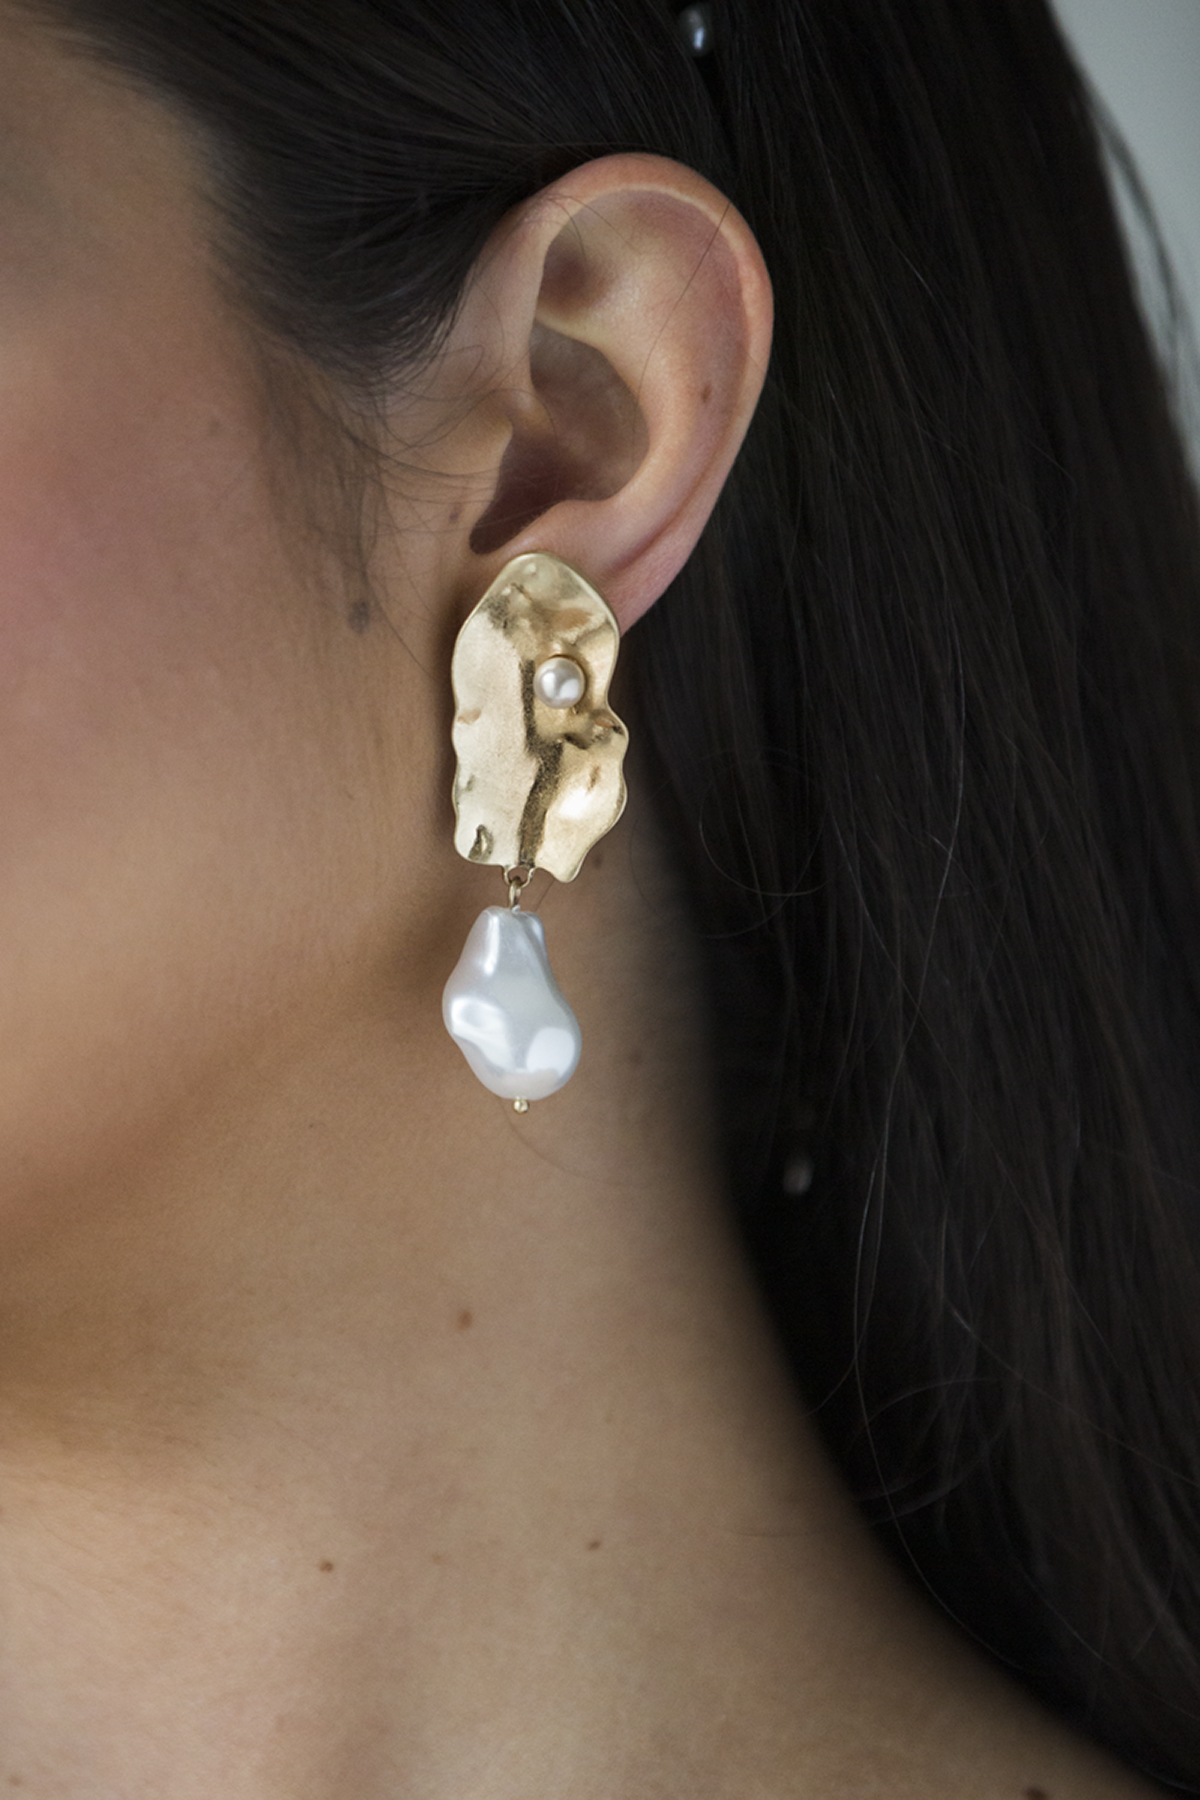 We are totally in love with this pair of earrings crafted in 18k gold electoplate and featuring a tiny pearl detail, and baroque pearl drop. Drawing from elements from nature, this design is synonymous with the stylish modern day bride. Subtle beauty is a part of your bridal look with these fine creations.